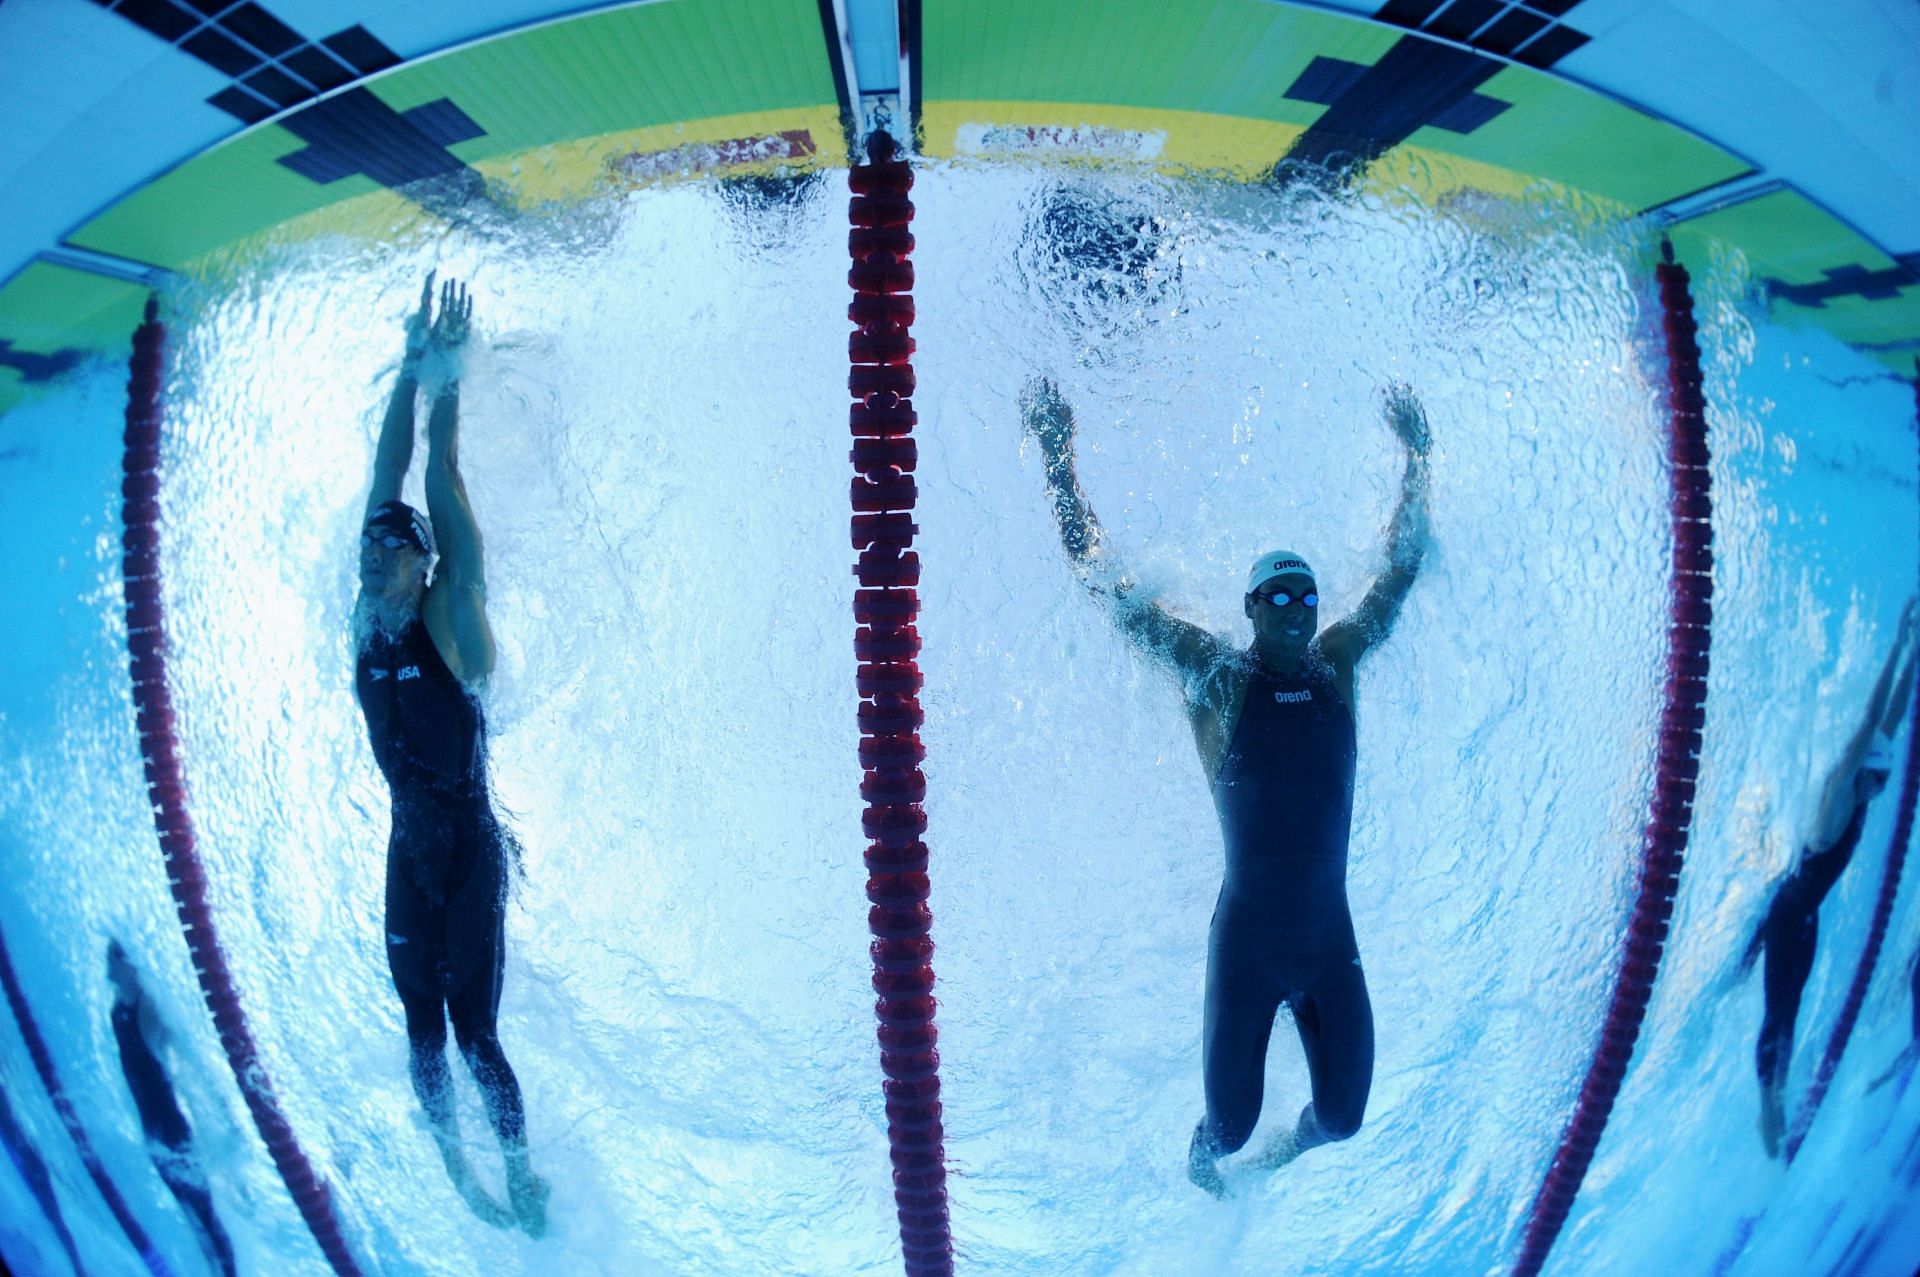 Michael Phelps of the United States (L) finishes just in front of Milorad Cavic of Serbia to win the gold medal and break a new world record in a time of 49.82 in the Men&#039;s 100m Butterfly Final during the 13th FINA World Championships at the Stadio del Nuoto on August 1, 2009 in Rome, Italy. (Photo by Al Bello/Getty Images)